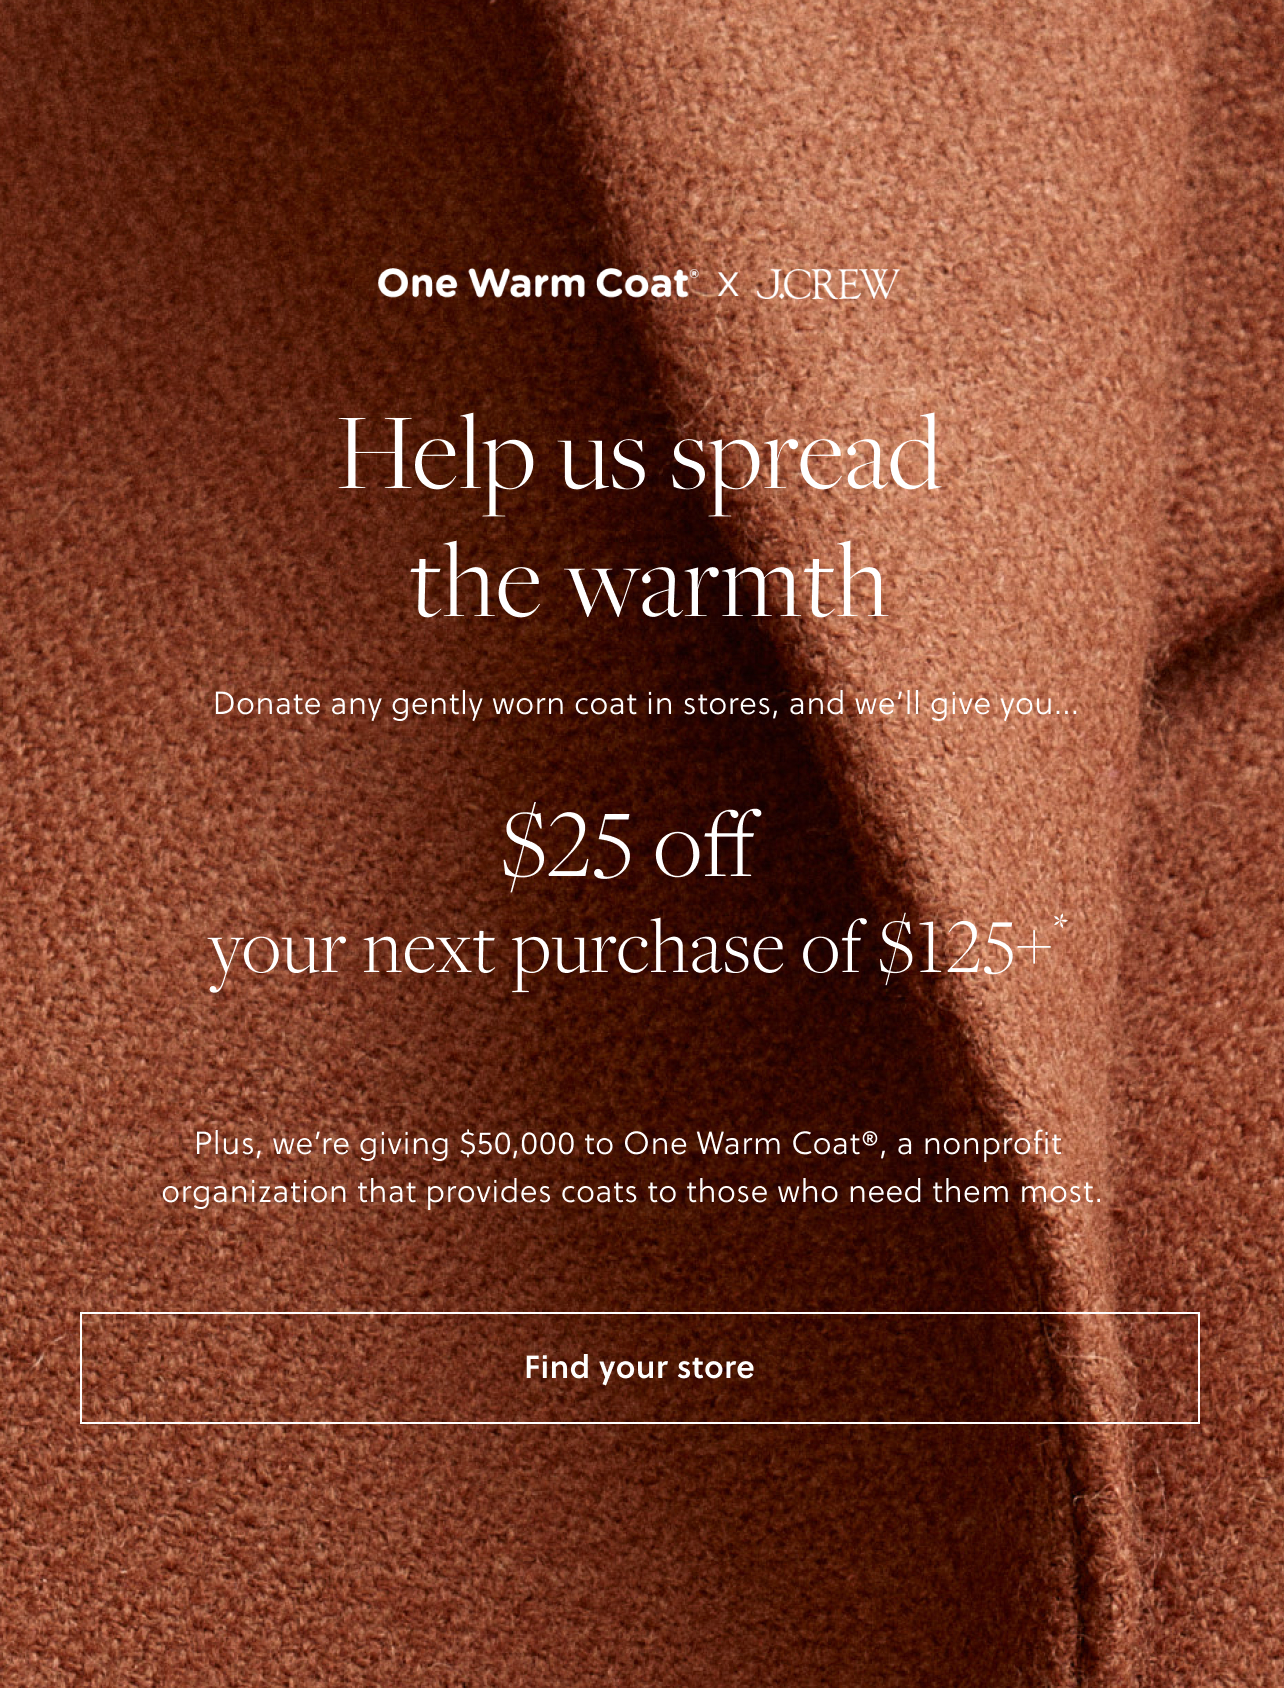 J.Crew: Help us spread the warmth with One Warm Coat